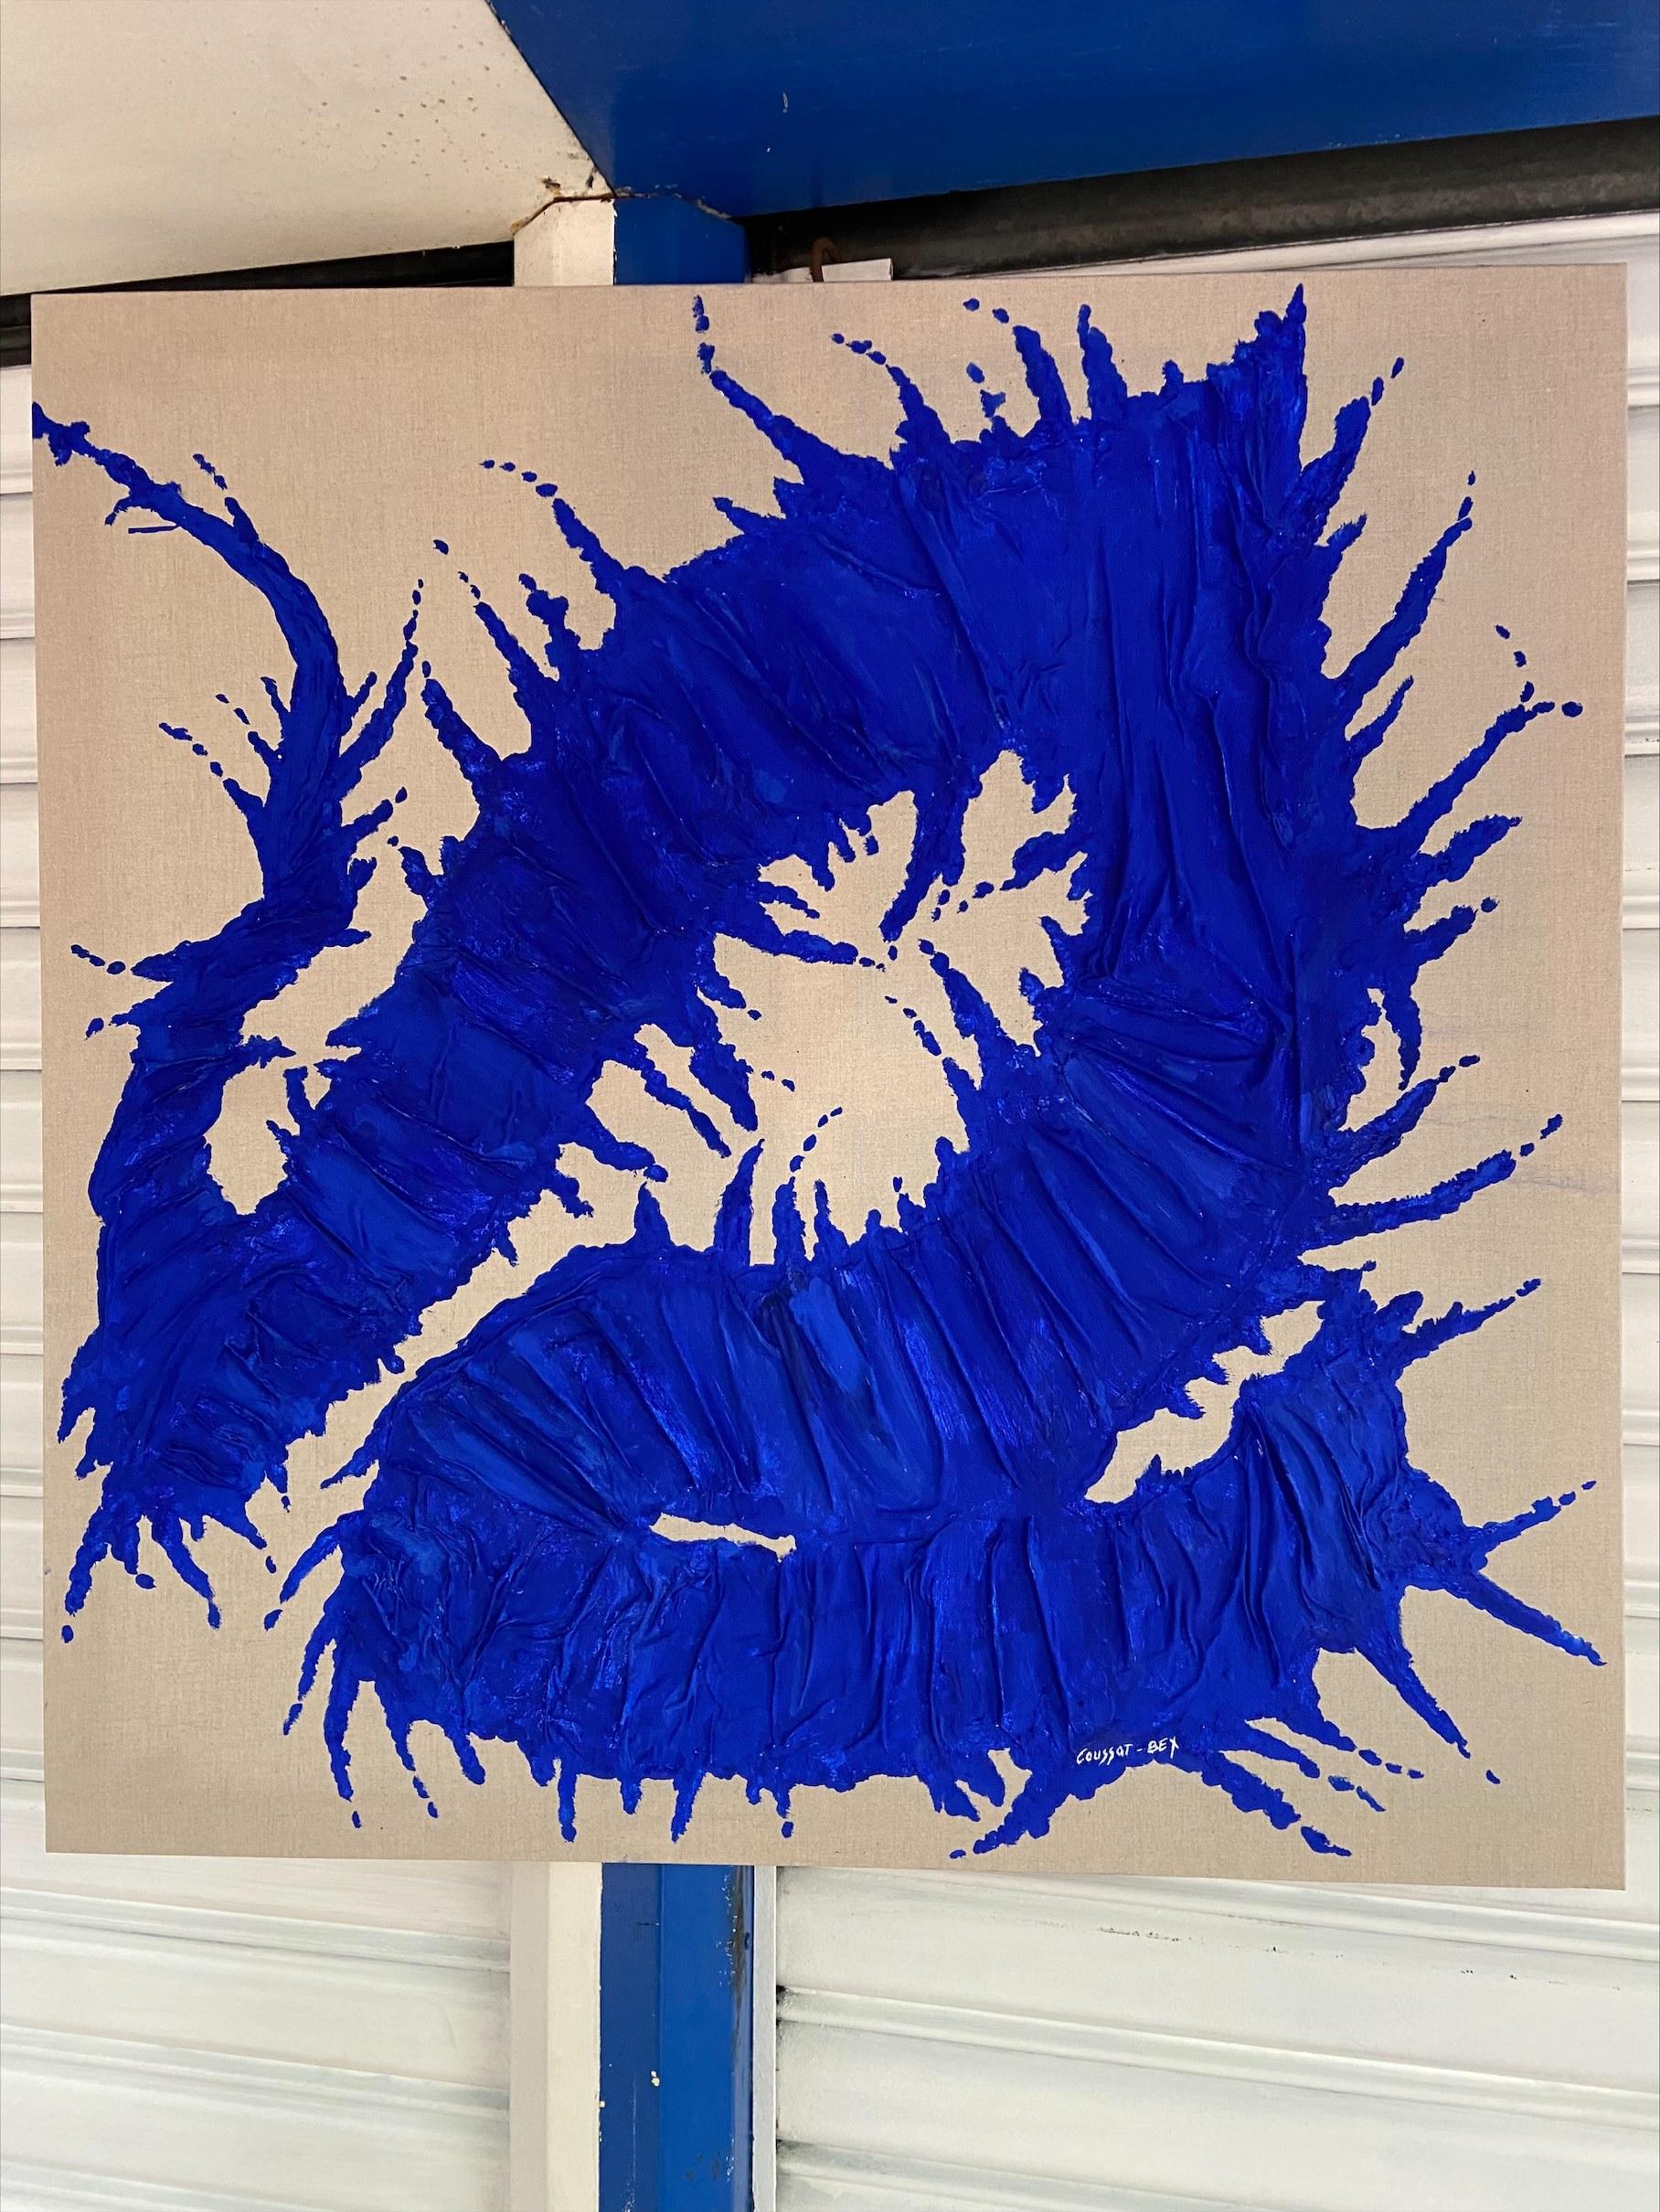 Coussot Bex - Blue Dragon
2021
Acrylic on canvas

Signed by the artist
Measures: 100 x 100 x P2cm.